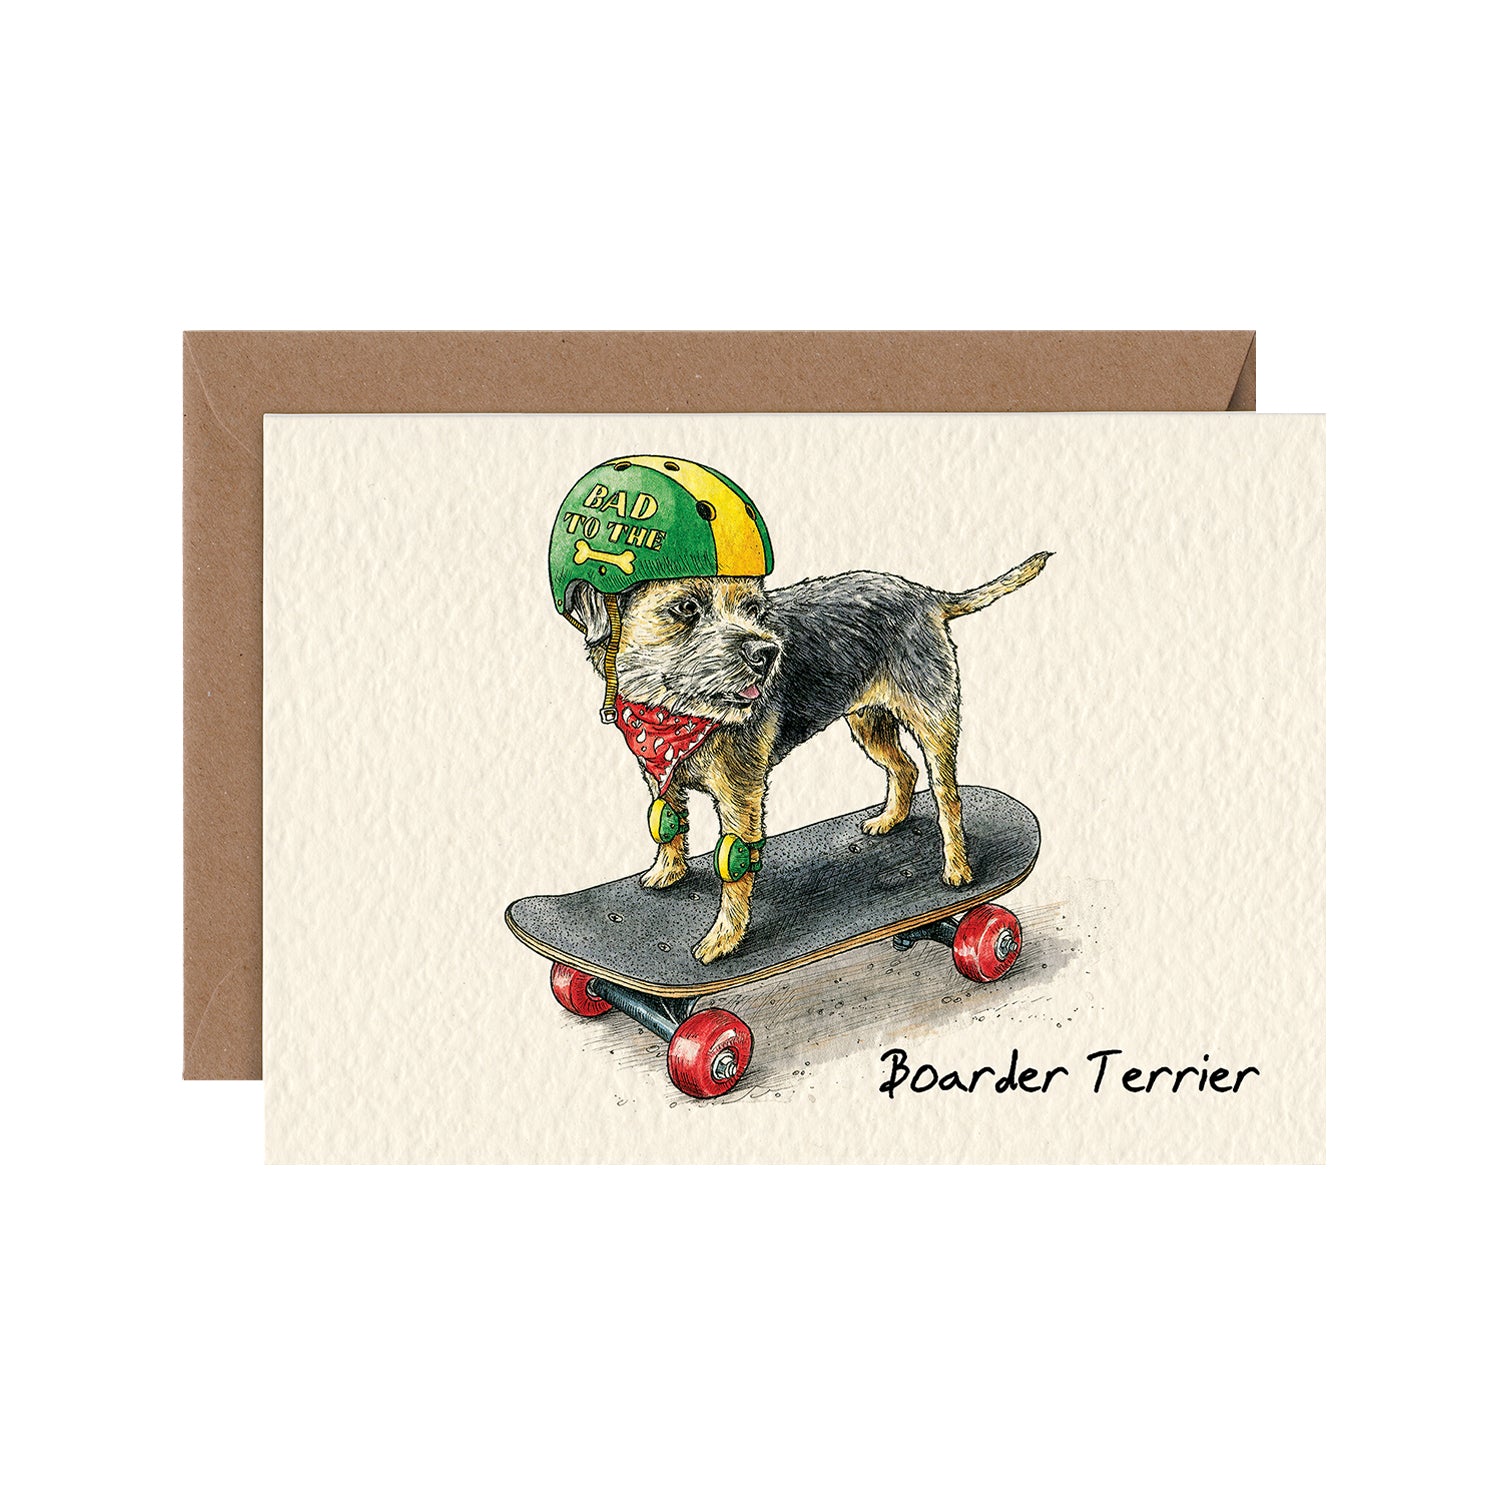 A Hester &amp; Cook Border Terrier greeting card showcasing a dog riding a skateboard, perfect for dog lovers.